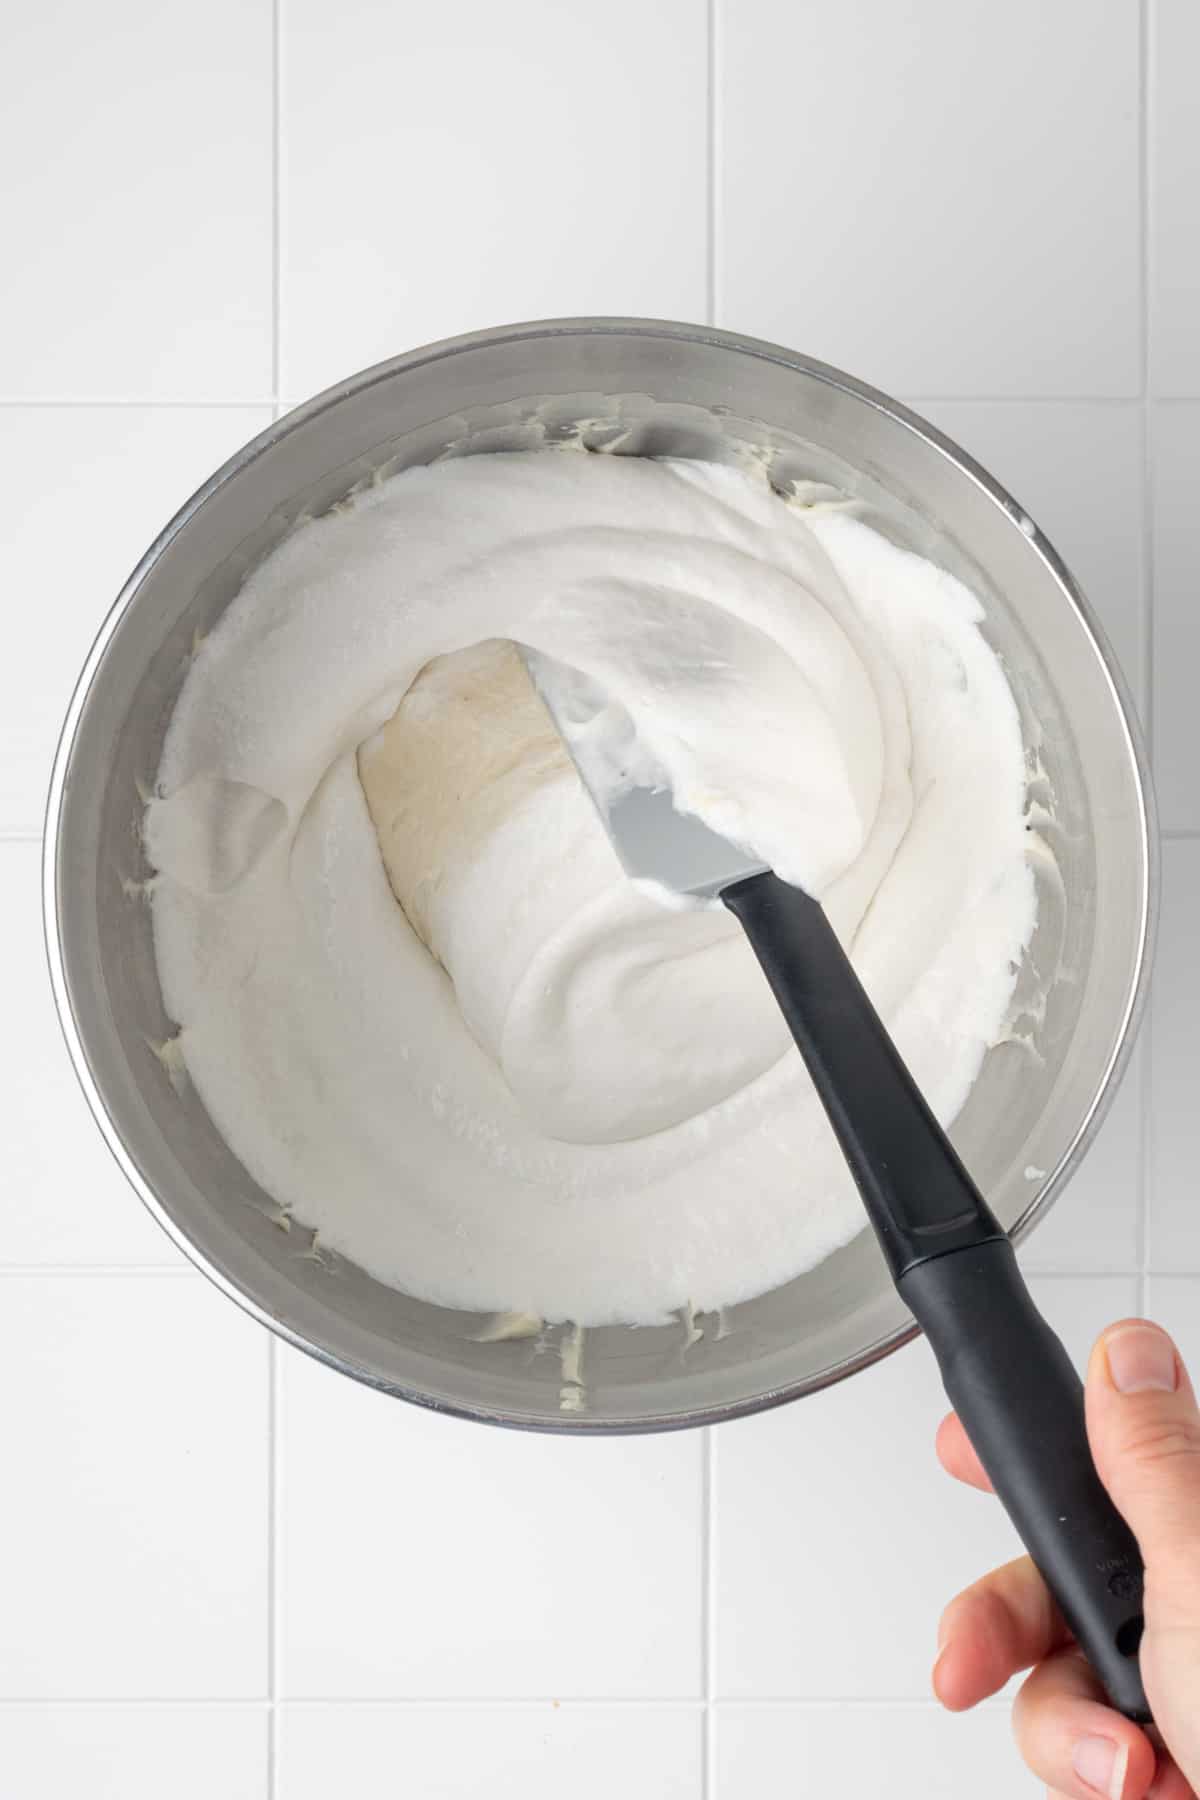 Whipped cream being folded into the cream cheese mixture in a metal mixing bowl.